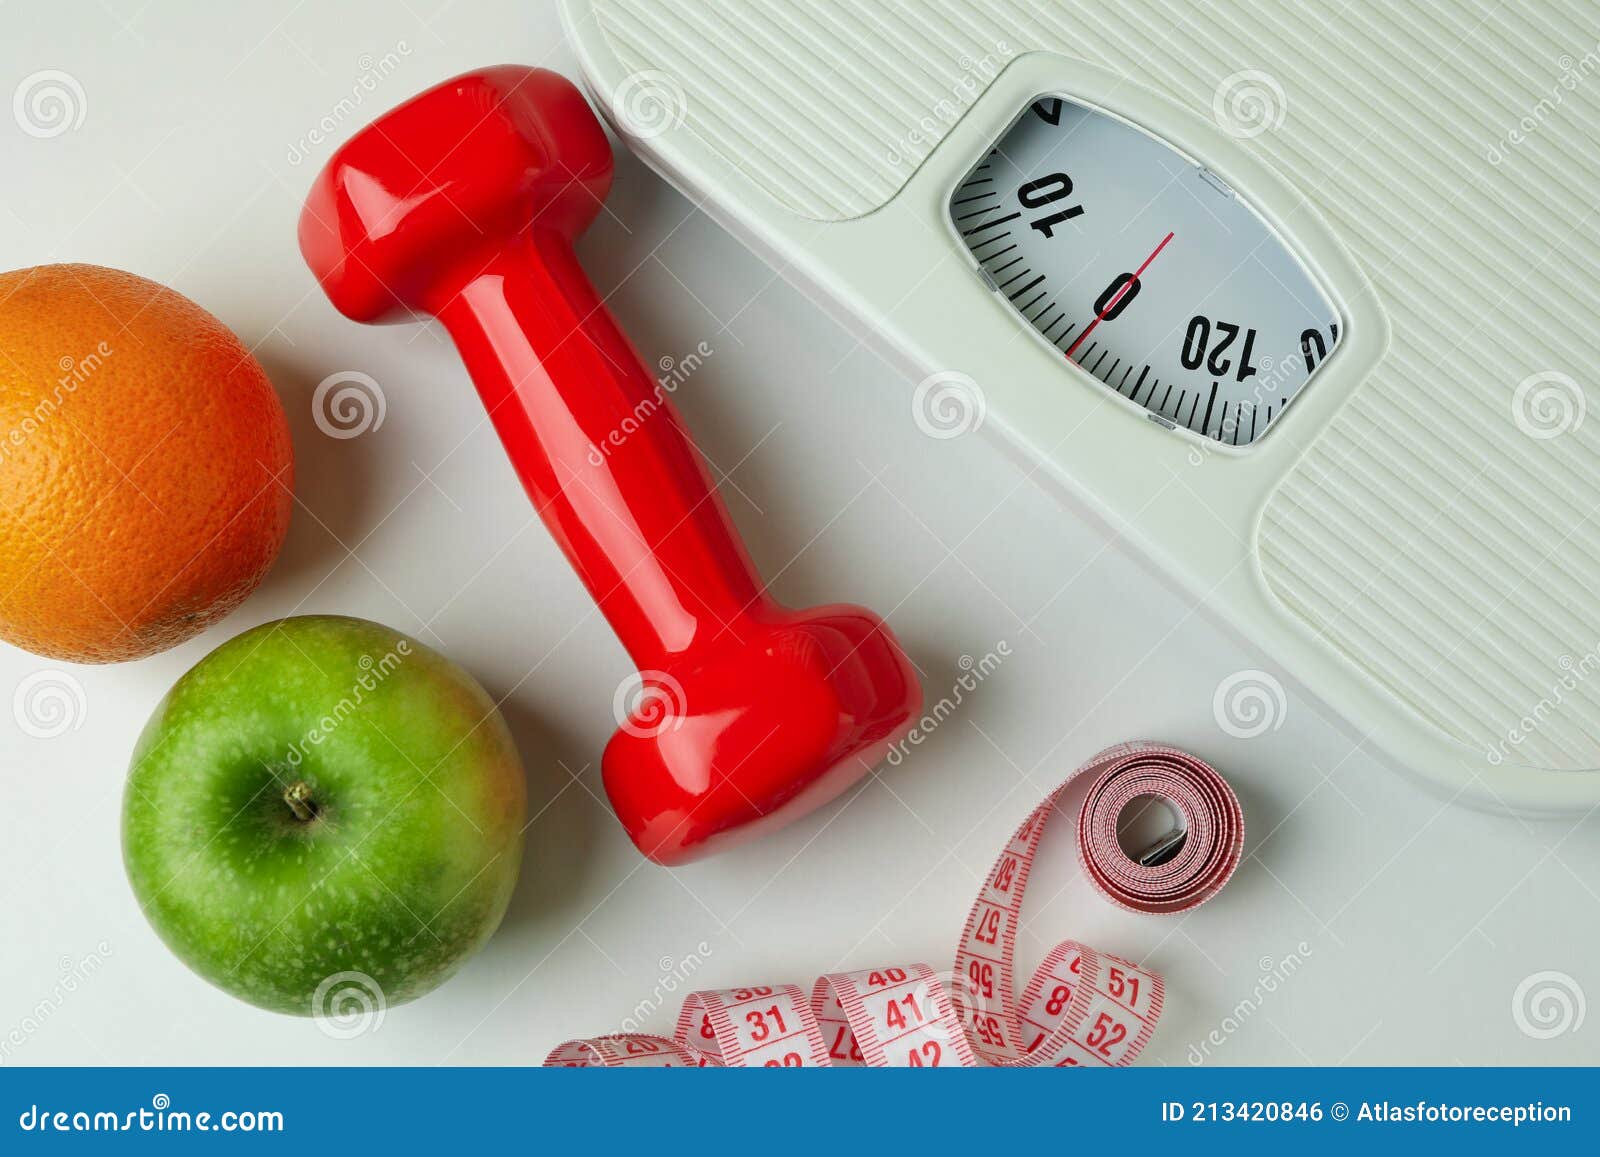 https://thumbs.dreamstime.com/z/weight-loss-accessories-white-background-close-up-weight-loss-accessories-white-background-close-up-213420846.jpg